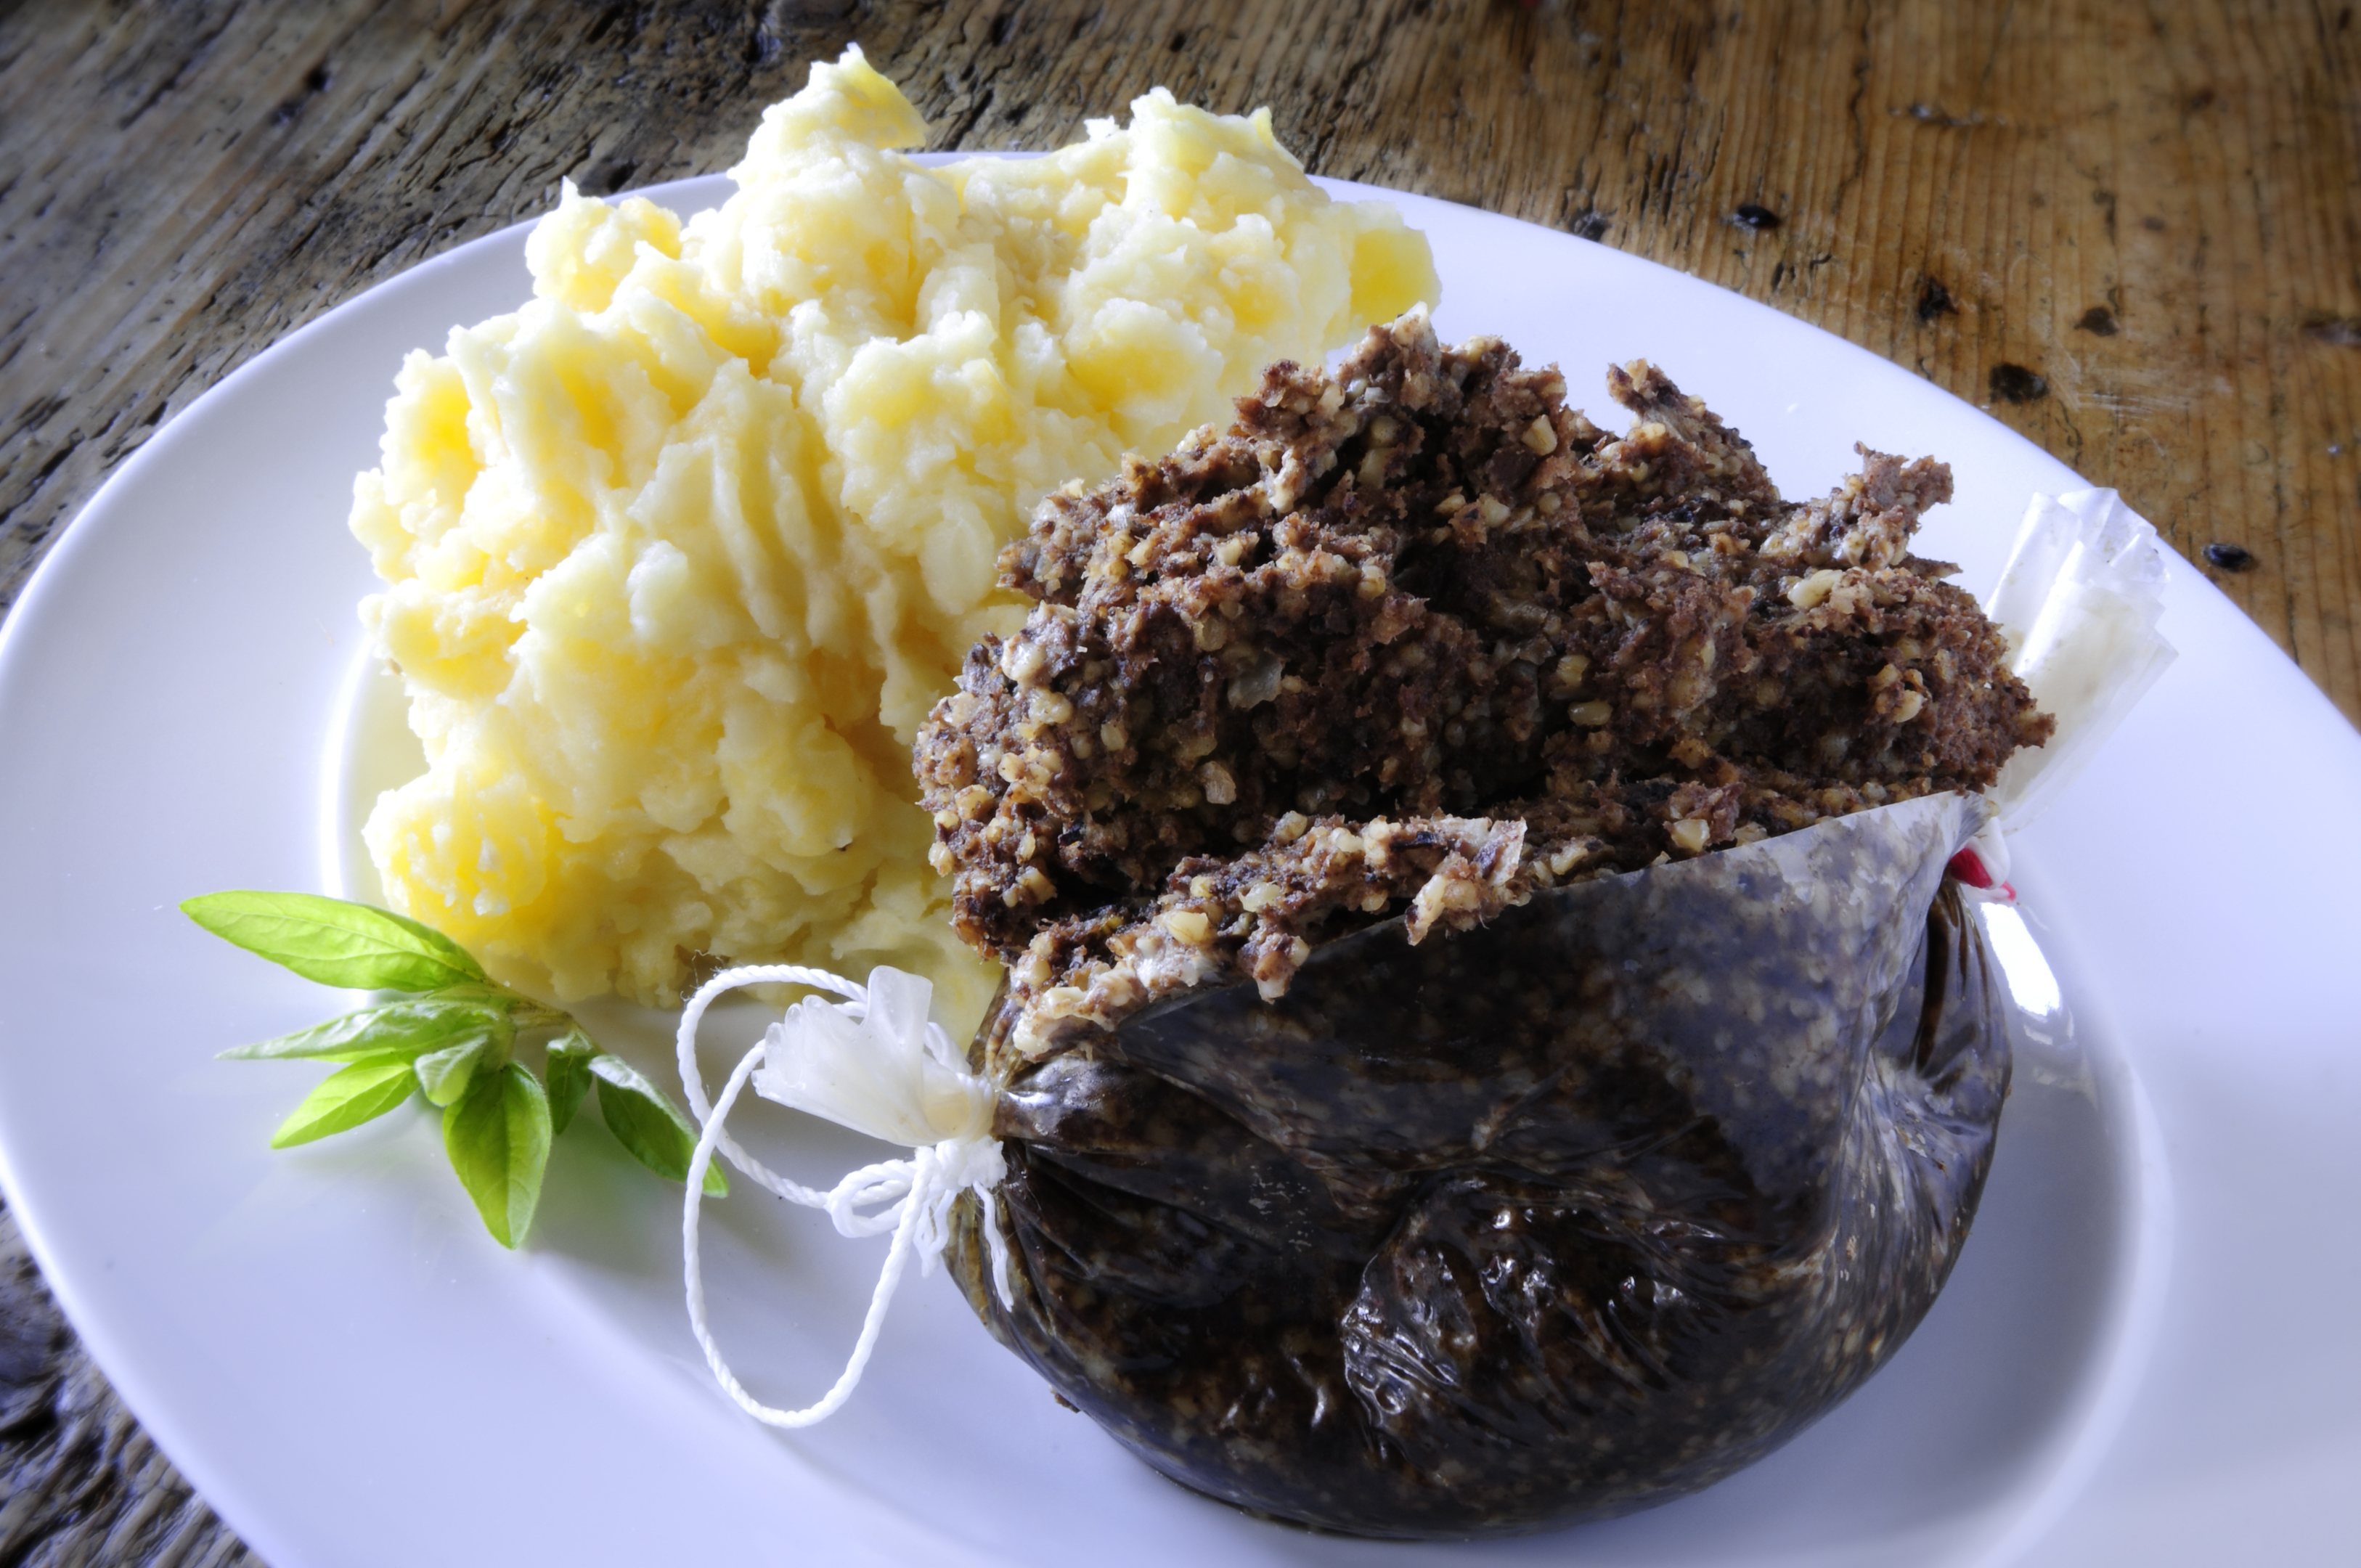 January saw strong haggis sales (Getty Images/iStock)